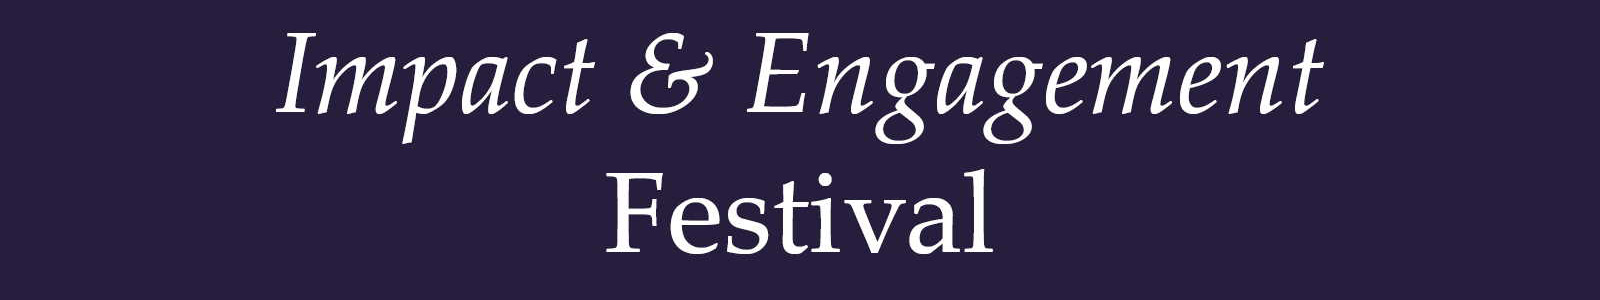 Impact and Engagement Festival